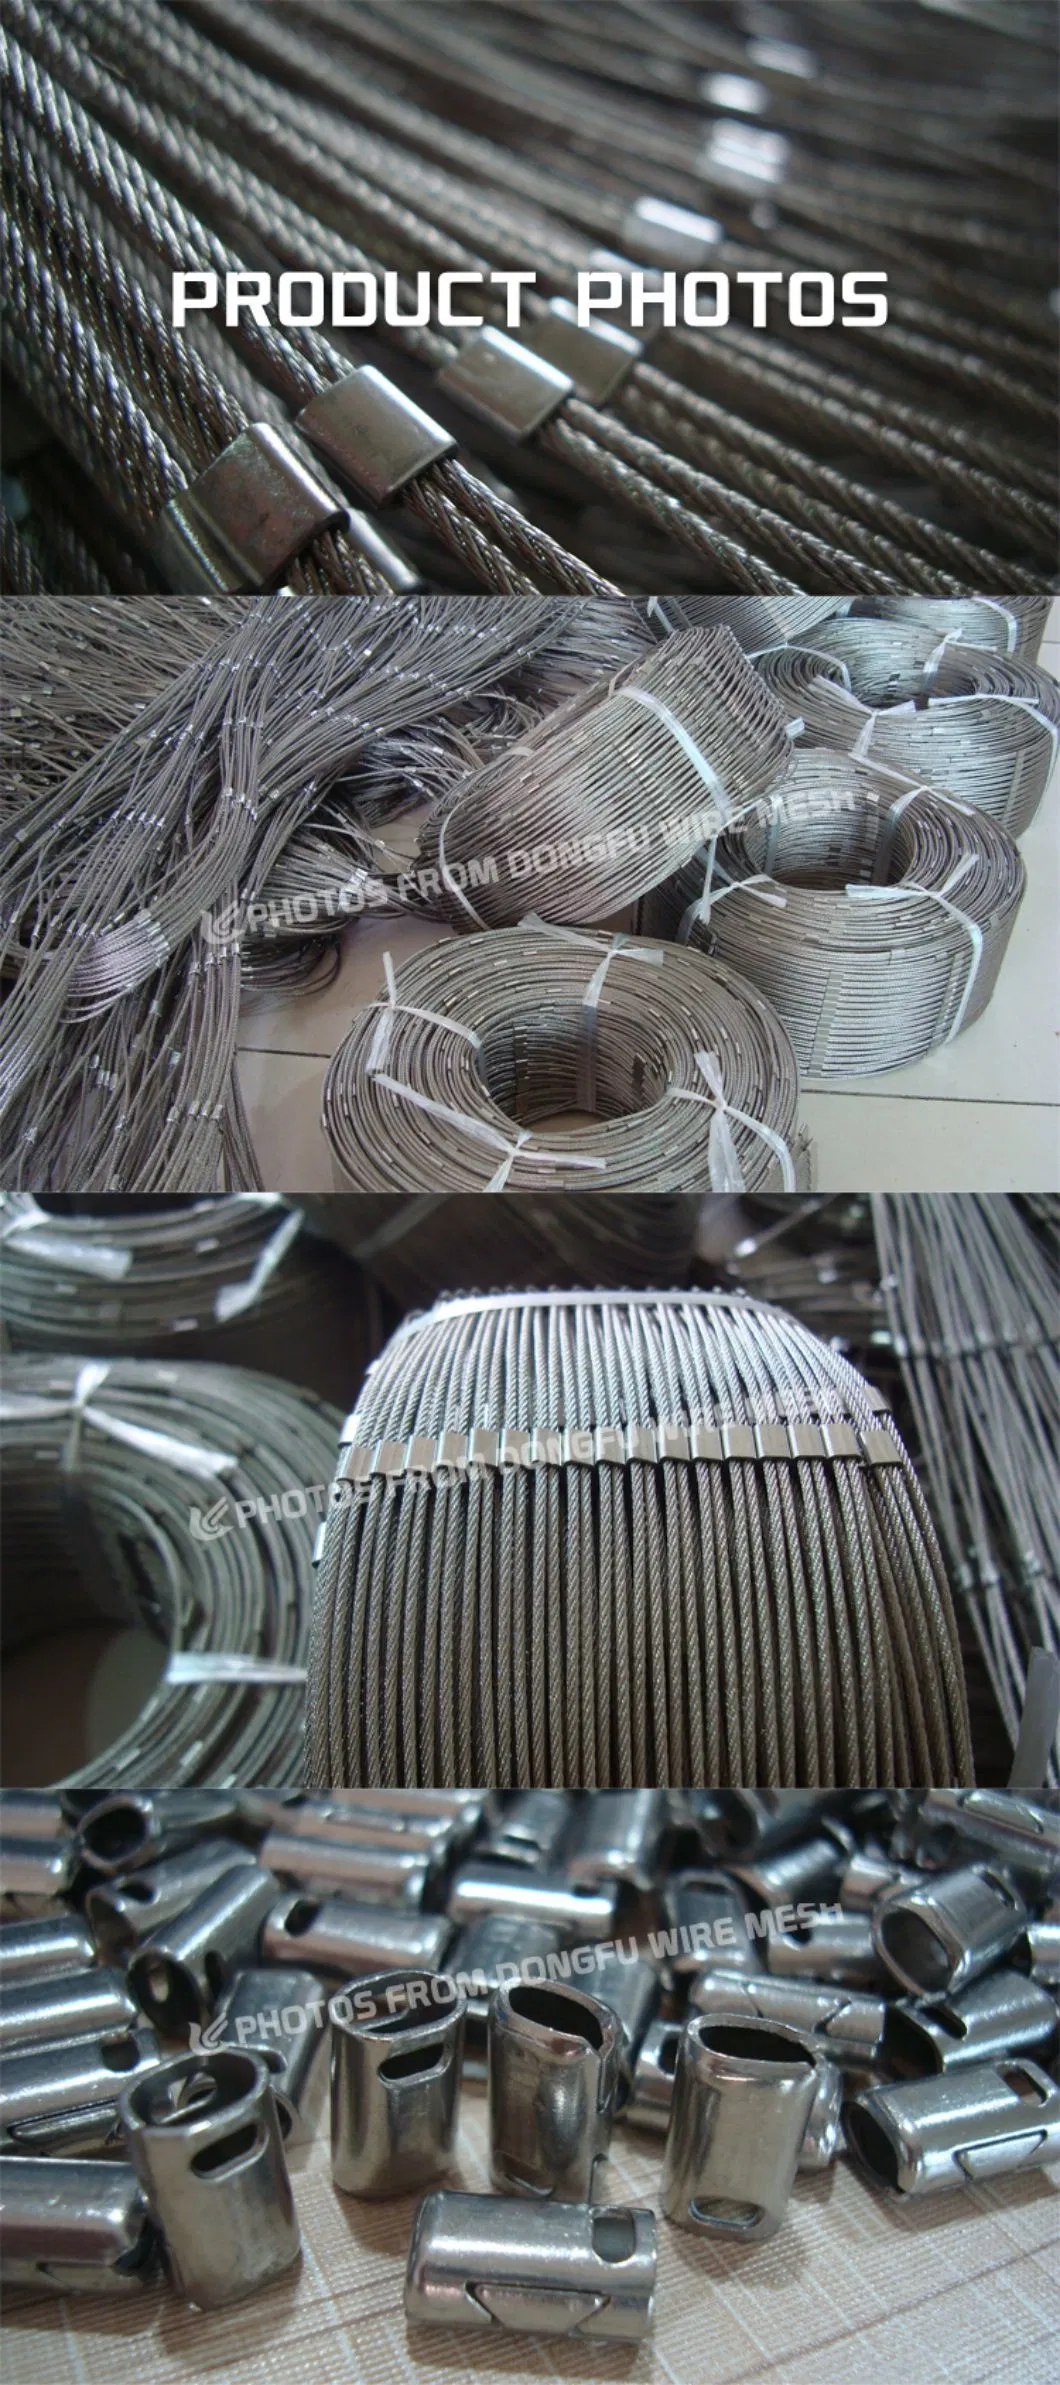 Hot Sale Web Net Rope Mesh Stainless/Flexible Stainless Steel Net/Wire Mesh for Growing Plants